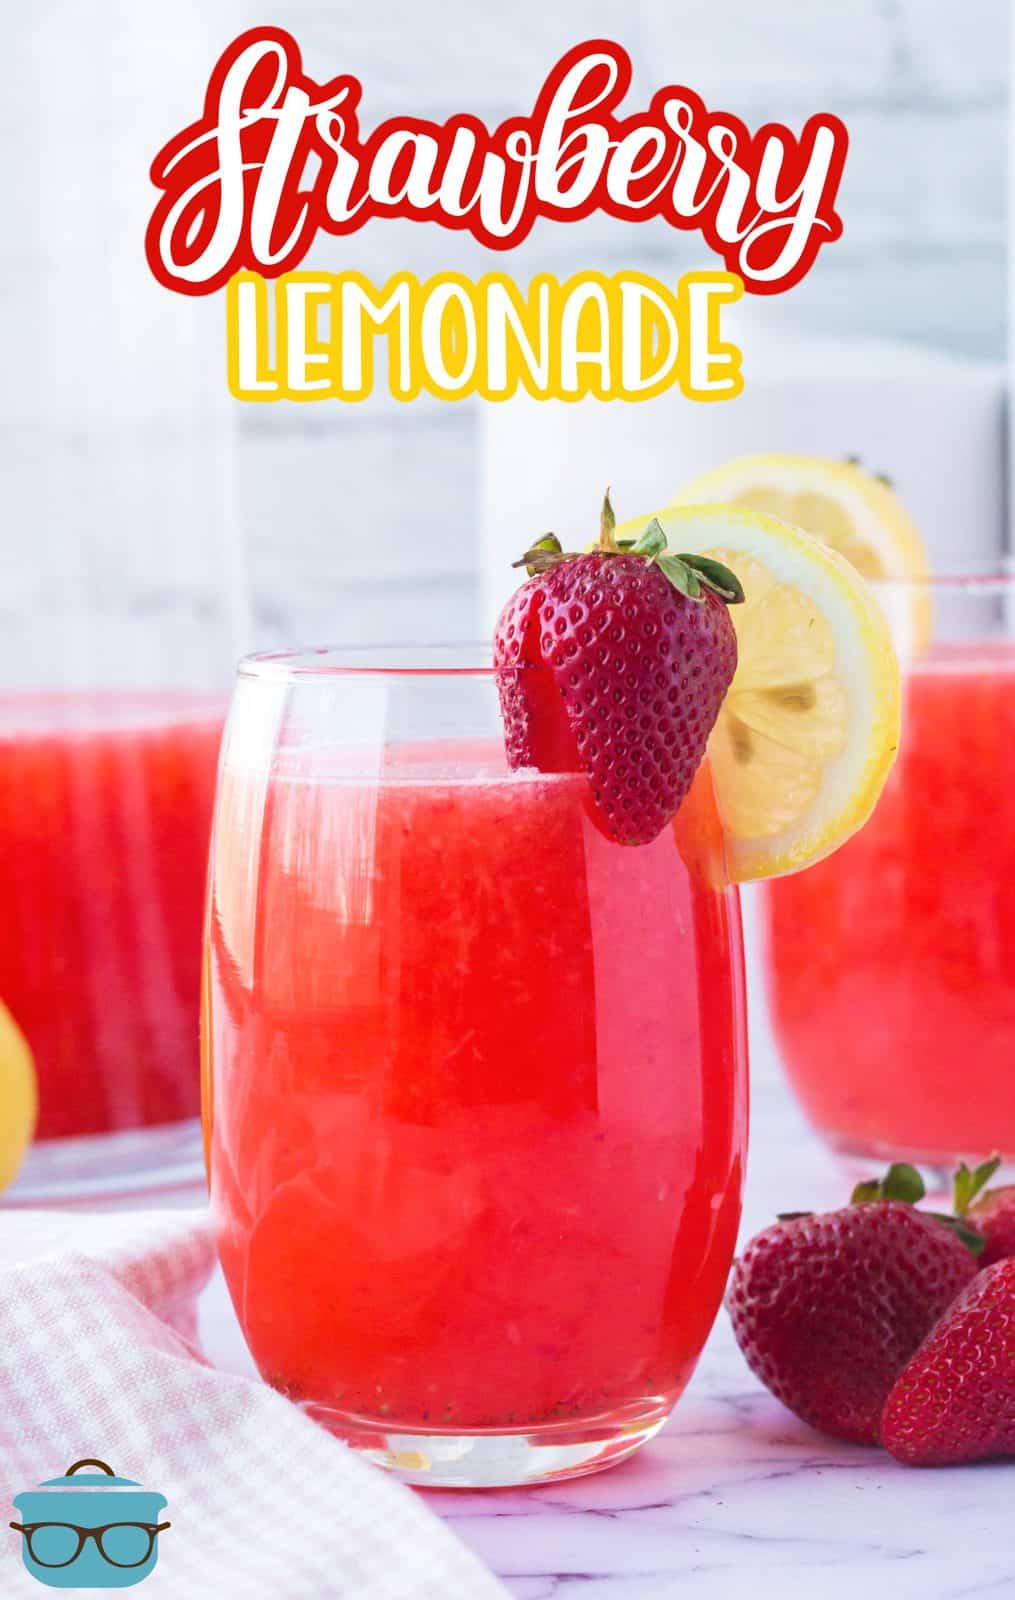 Pinterest image of Strawberry Lemonade in glasses garnished with strawberry and lemon.